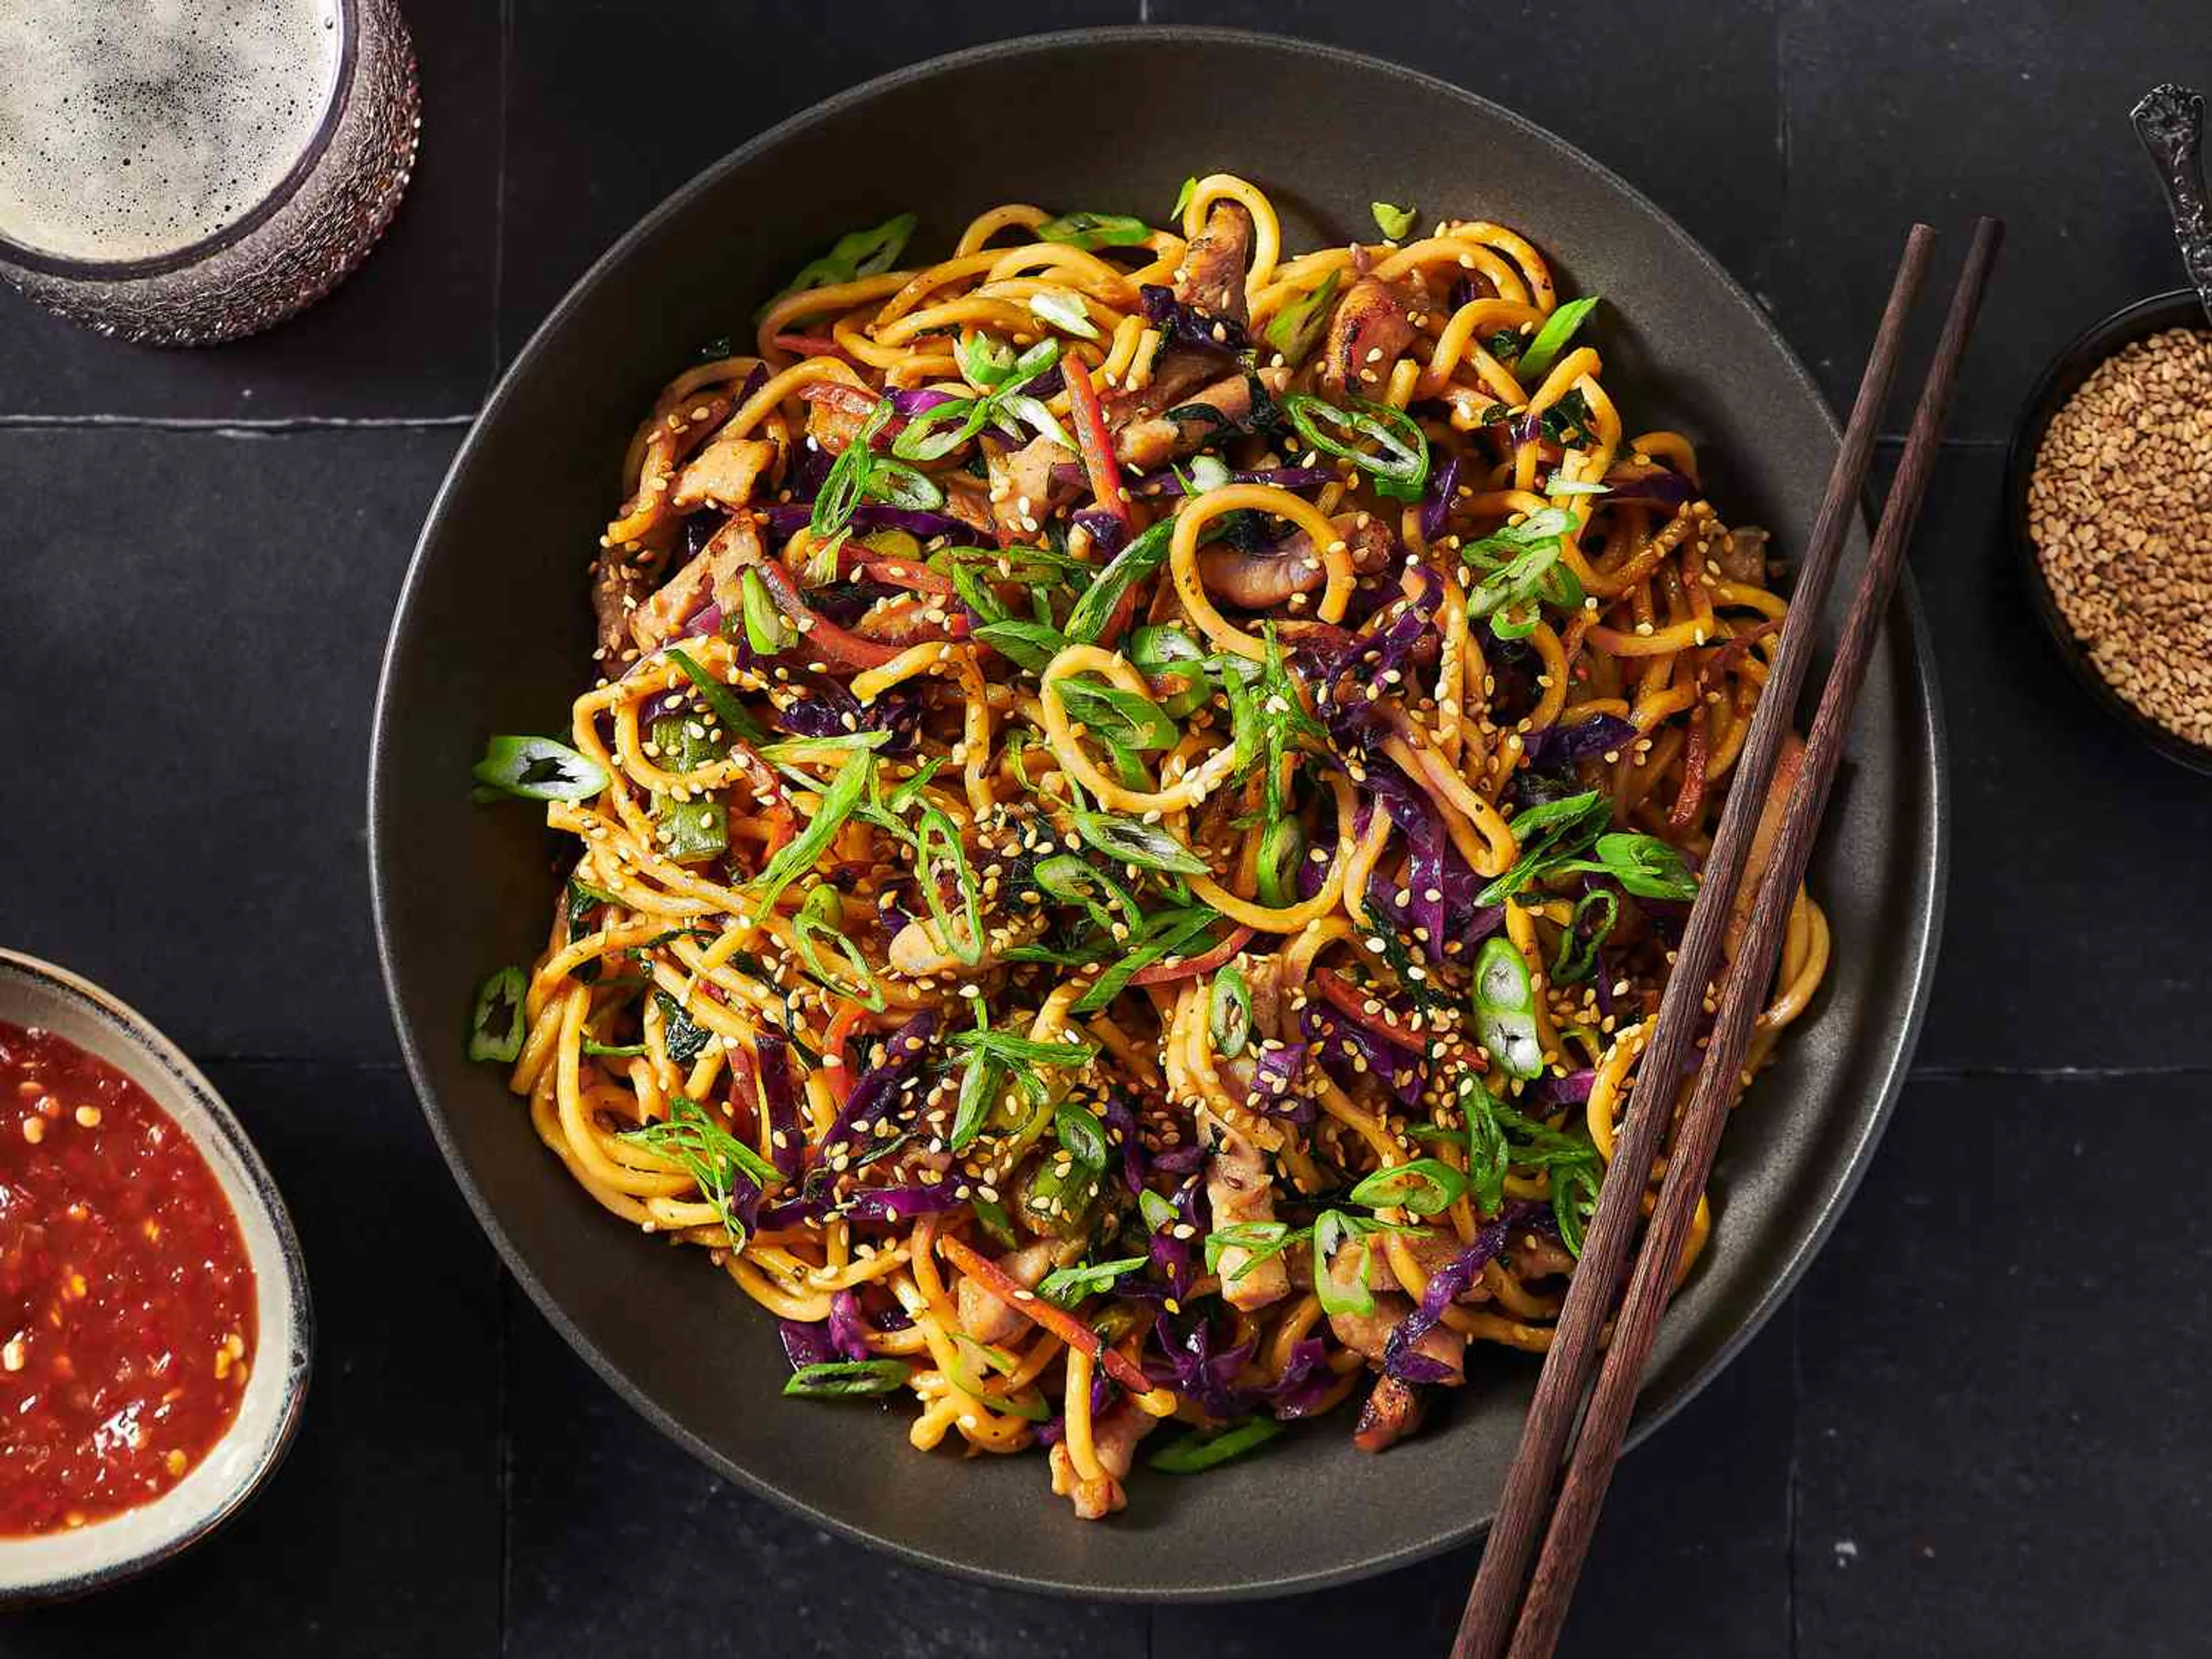 Stir-Fried Lo Mein Noodles With Pork and Vegetables Recipe